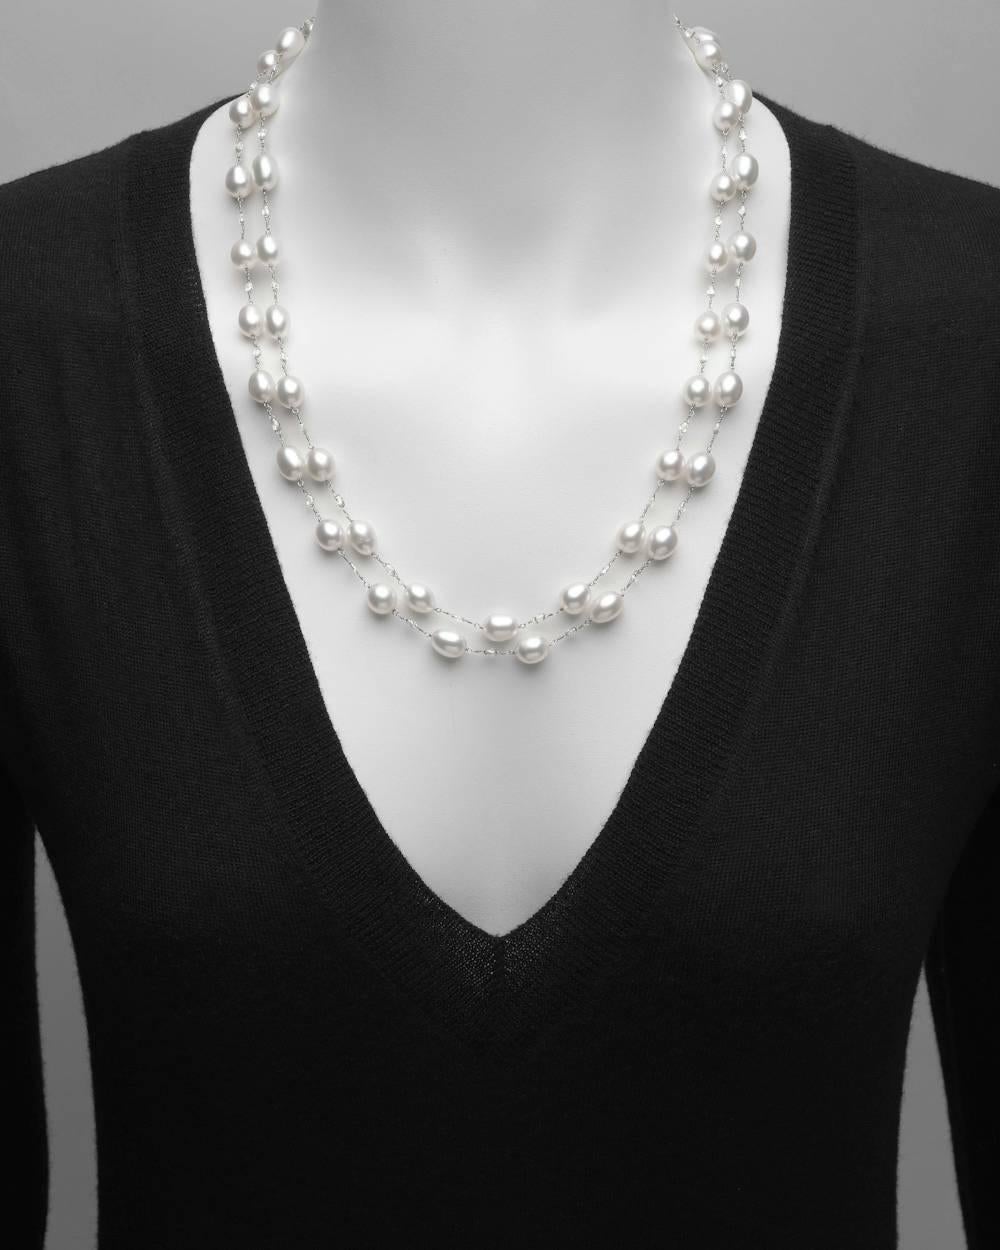 Chain wrap necklace, showcasing Keshi pearls alternating with briolette-cut diamonds, in platinum. Diamonds weighing approximately 7.75 total carats. 45